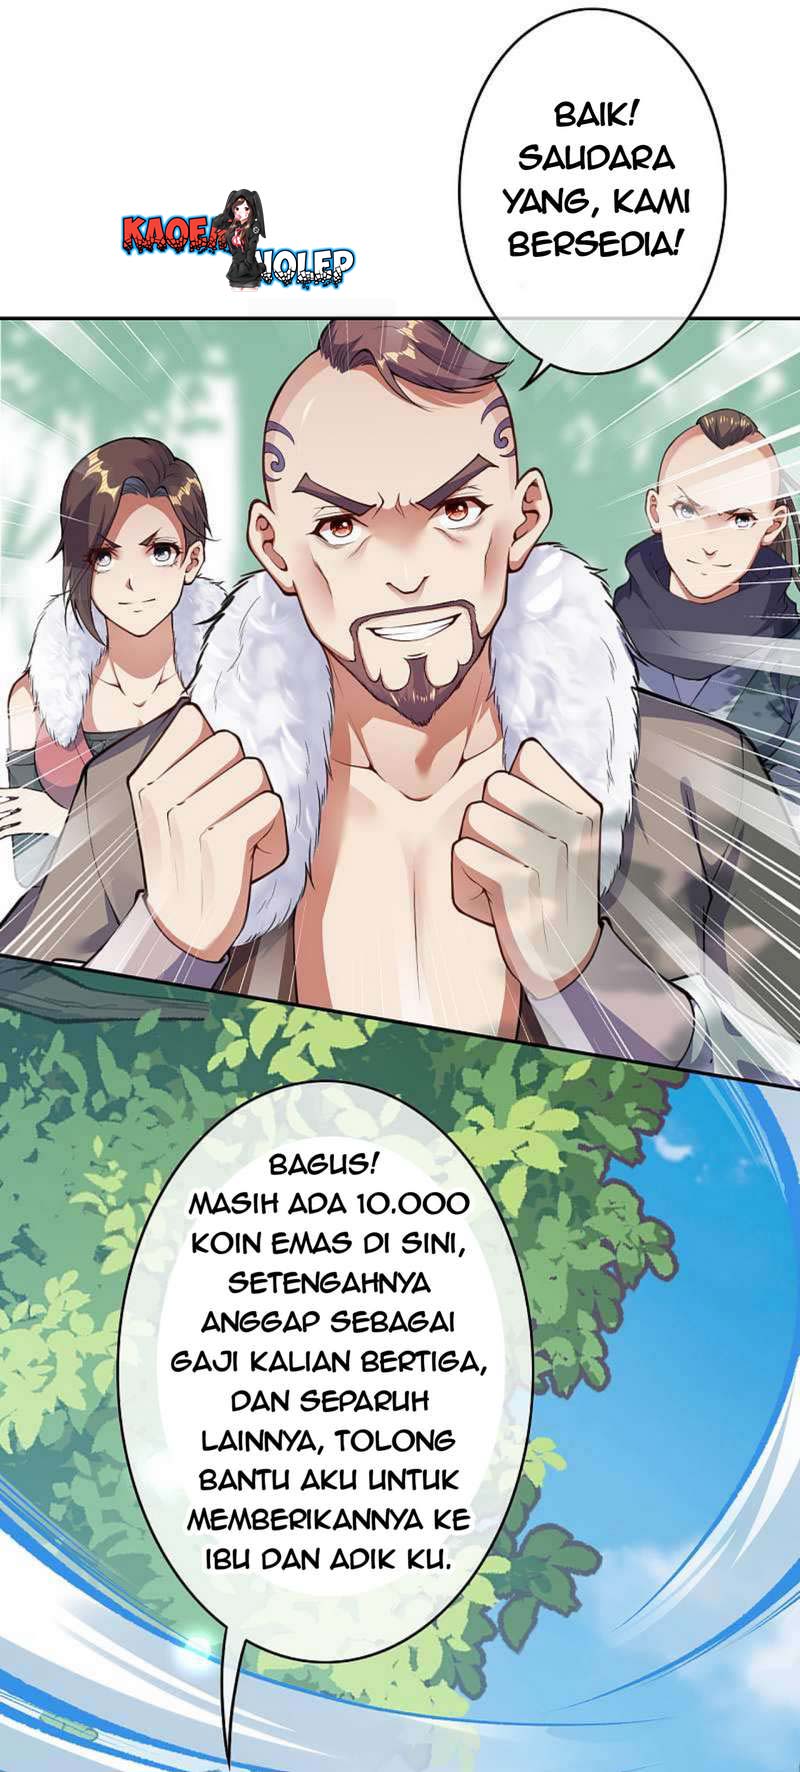 Invincible Sword Domain Chapter 28